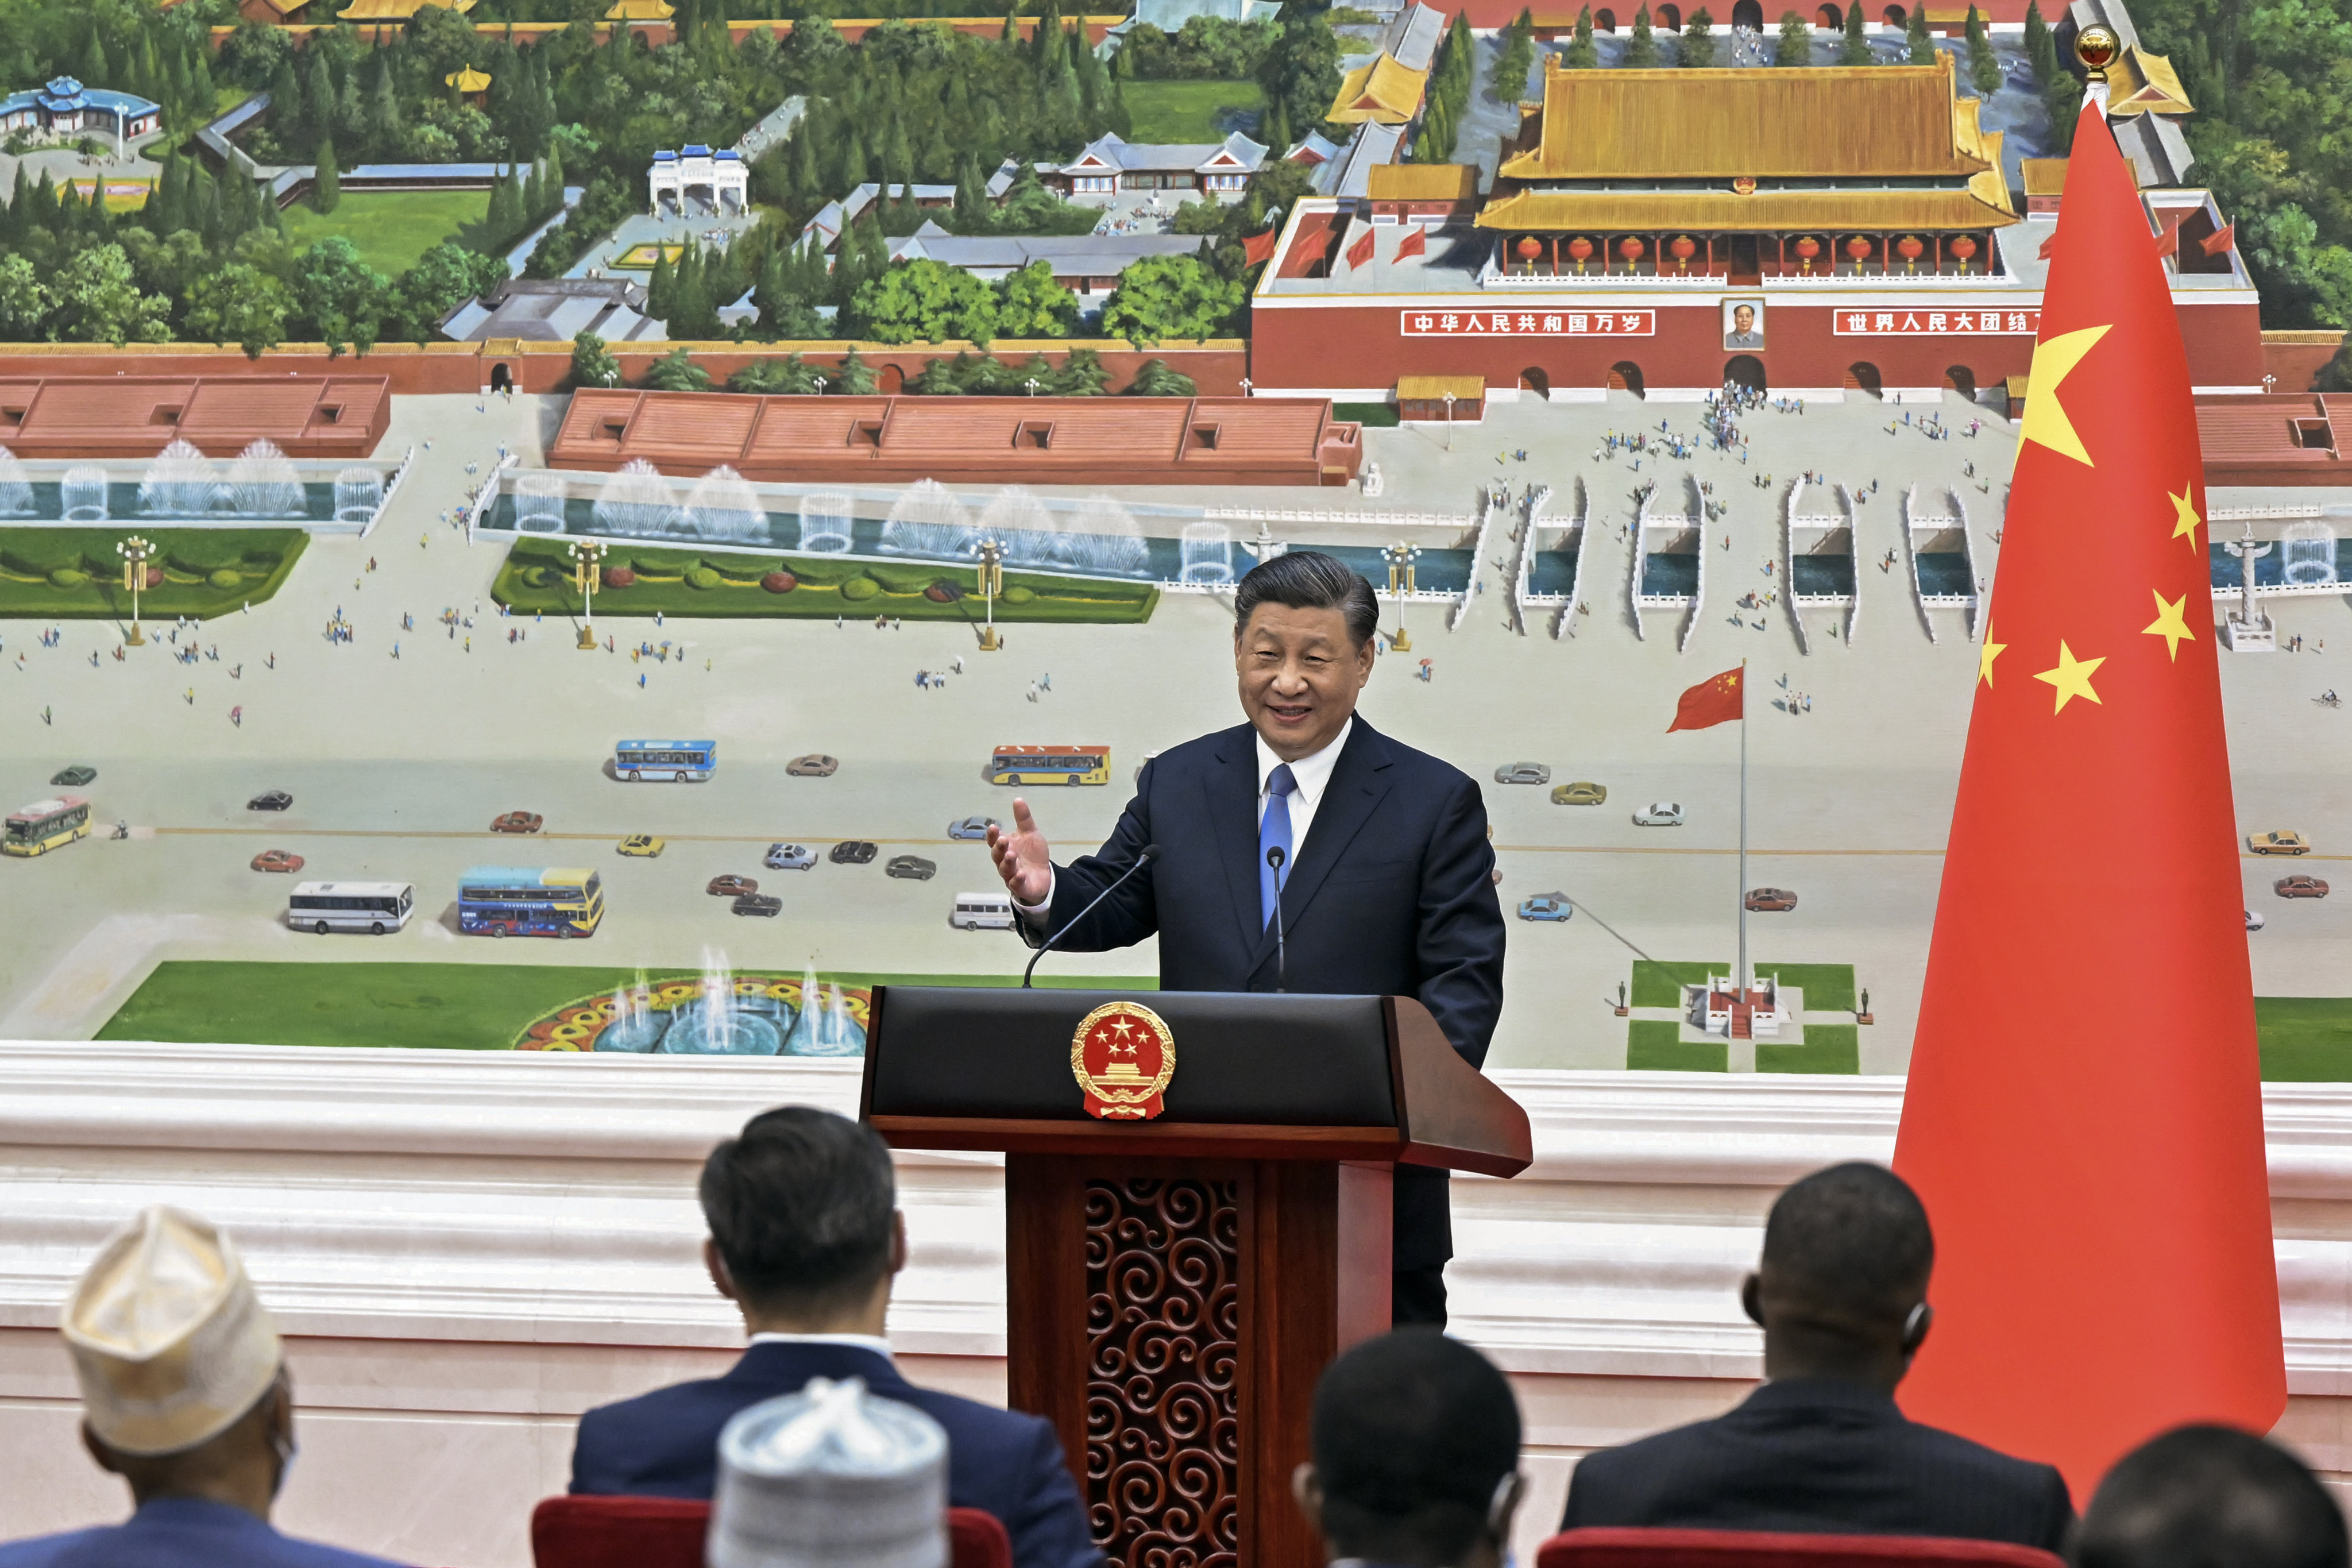 President Xi Jinping is leading Chinese belt and road efforts in Central Asia, as Western sanctions on Russia and global geopolitical headwinds create an economic vacuum in the region. Photo: Xinhua via AP